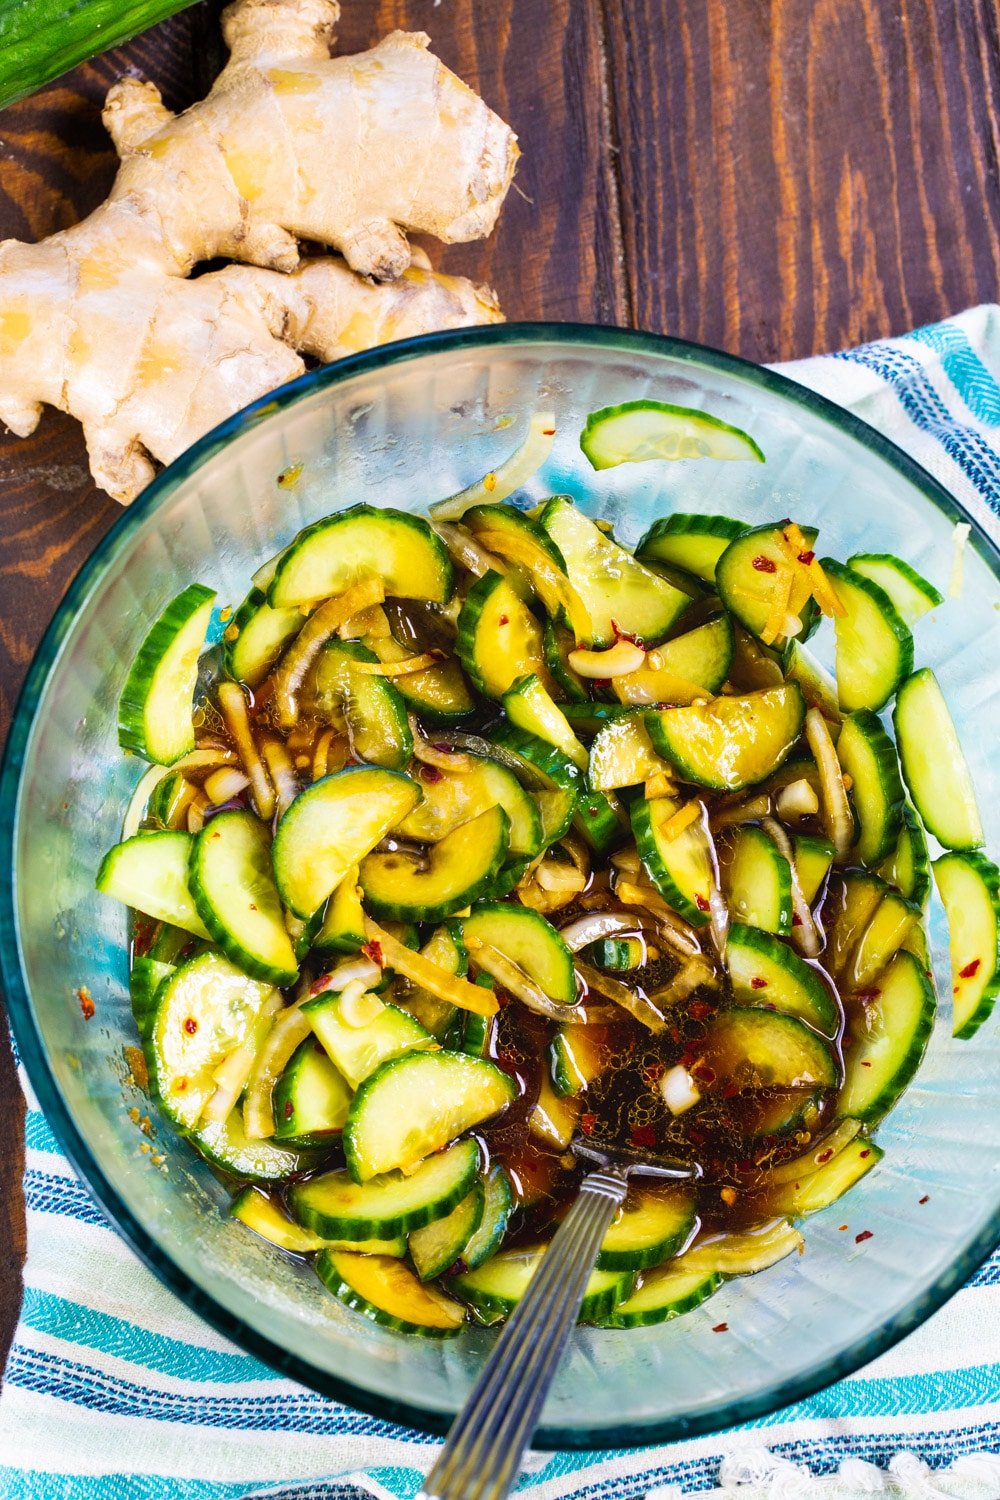 Cucumbers with all the dressing ingredients in a glass bowl.